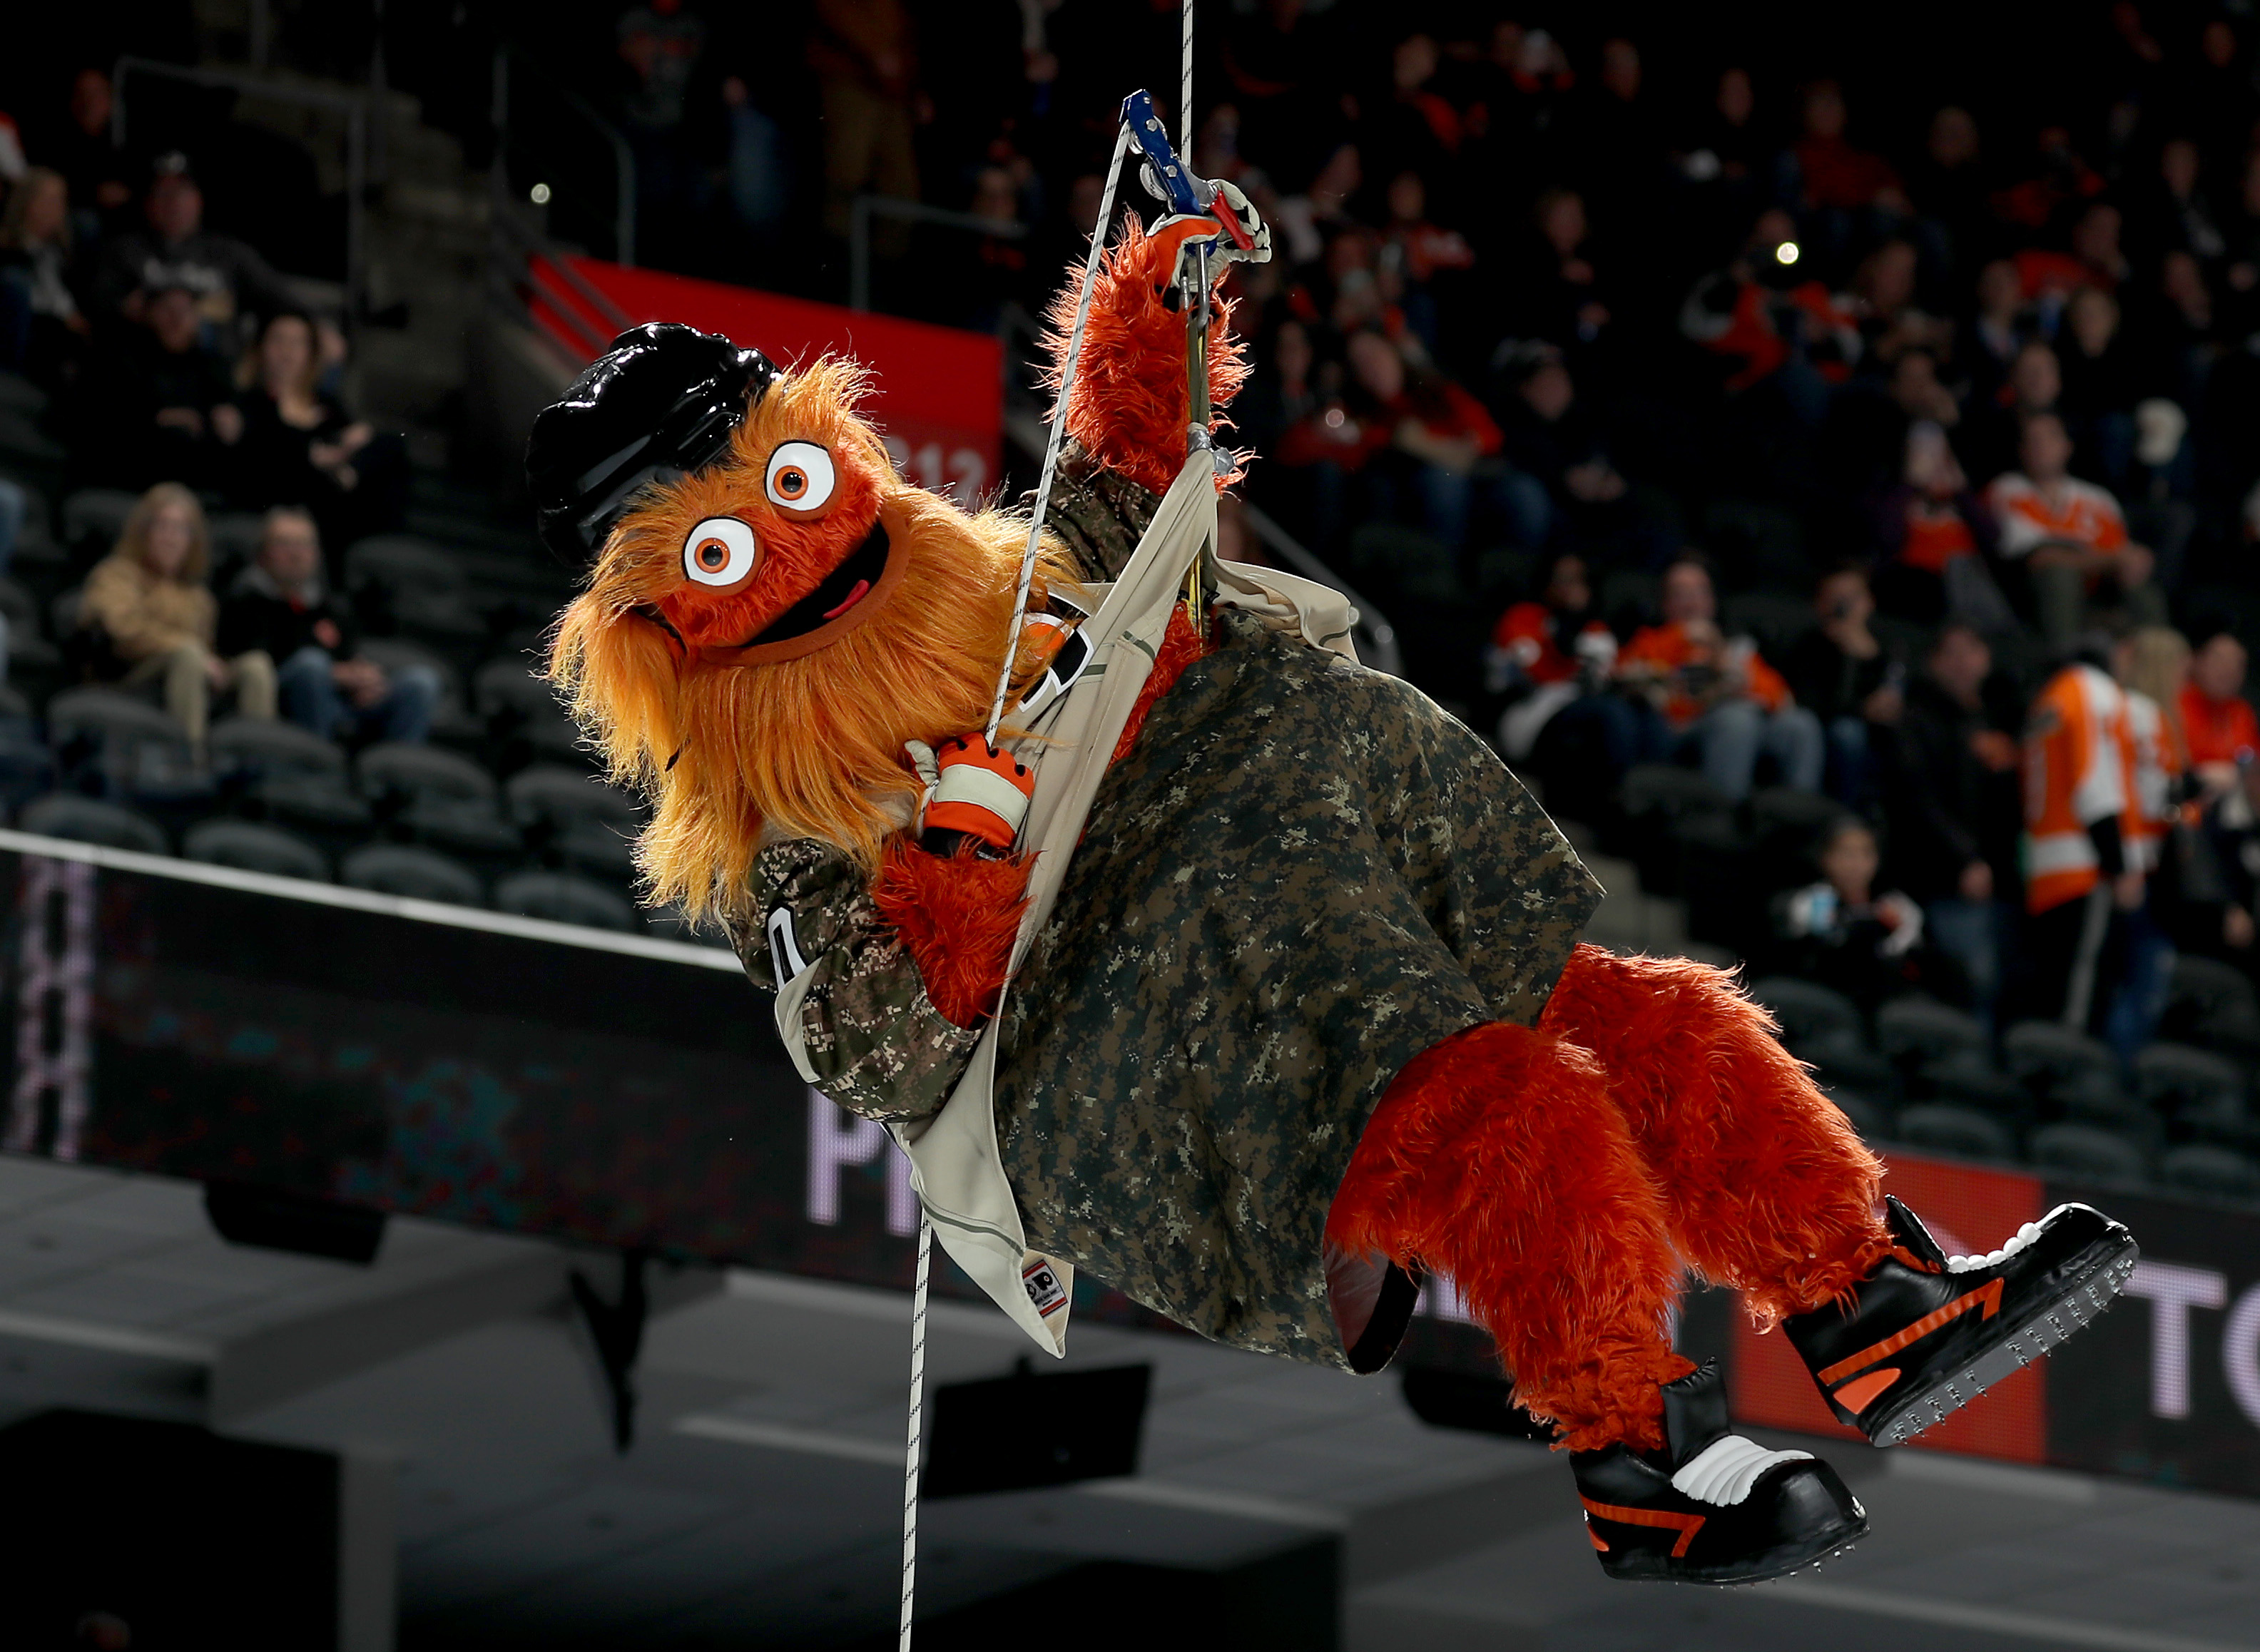 The Philadelphia Flyers mascot Gritty makes an entrance before the game between the Philadelphia Flyers and the Chicago Blackhawks at Wells Fargo Center on November 10, 2018 in Philadelphia, Pennsylvania. (Photo by Elsa/Getty Images) (Elsa—Getty Images)